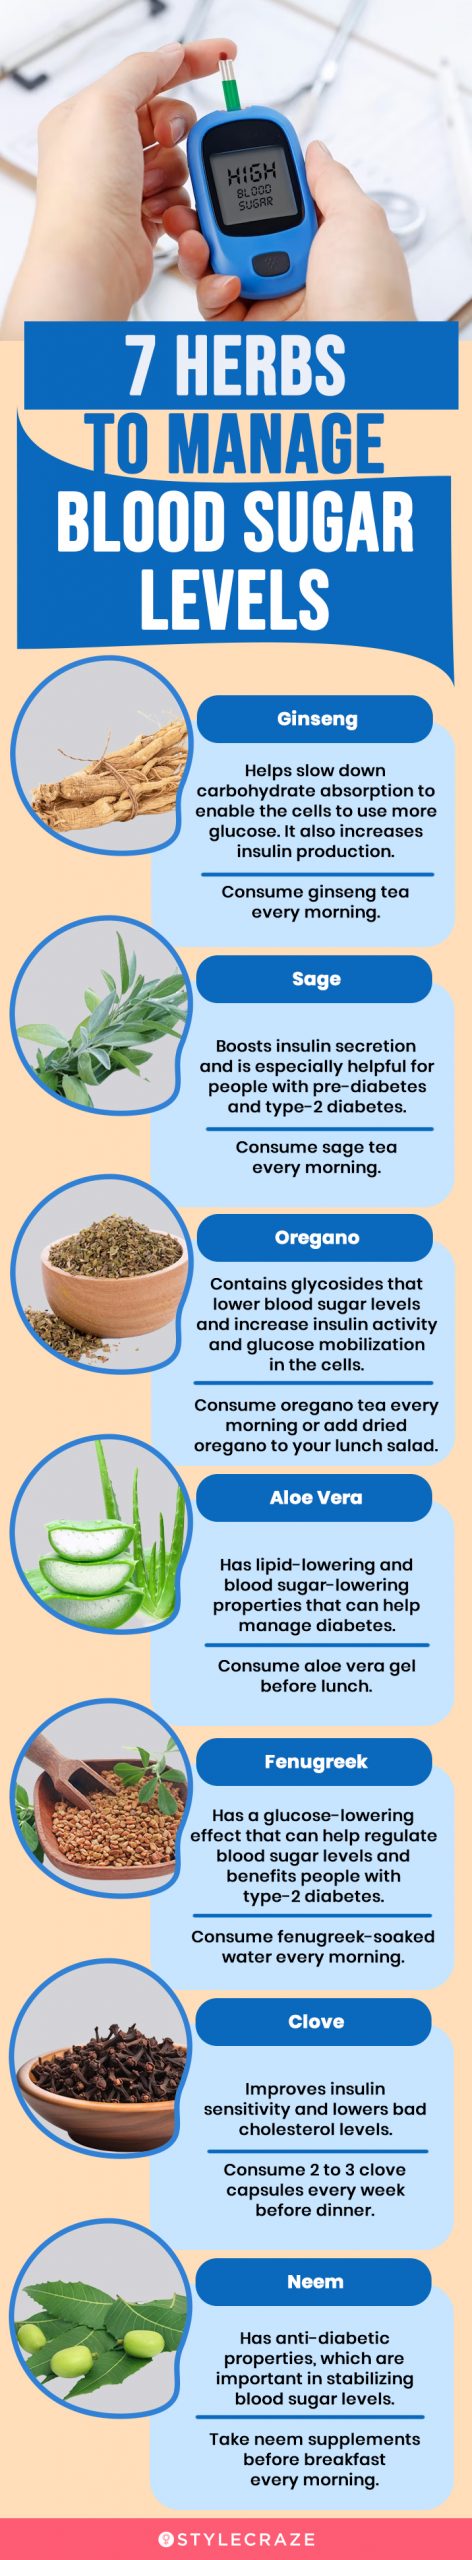 7 herbs to manage blood sugar levels(infographic)